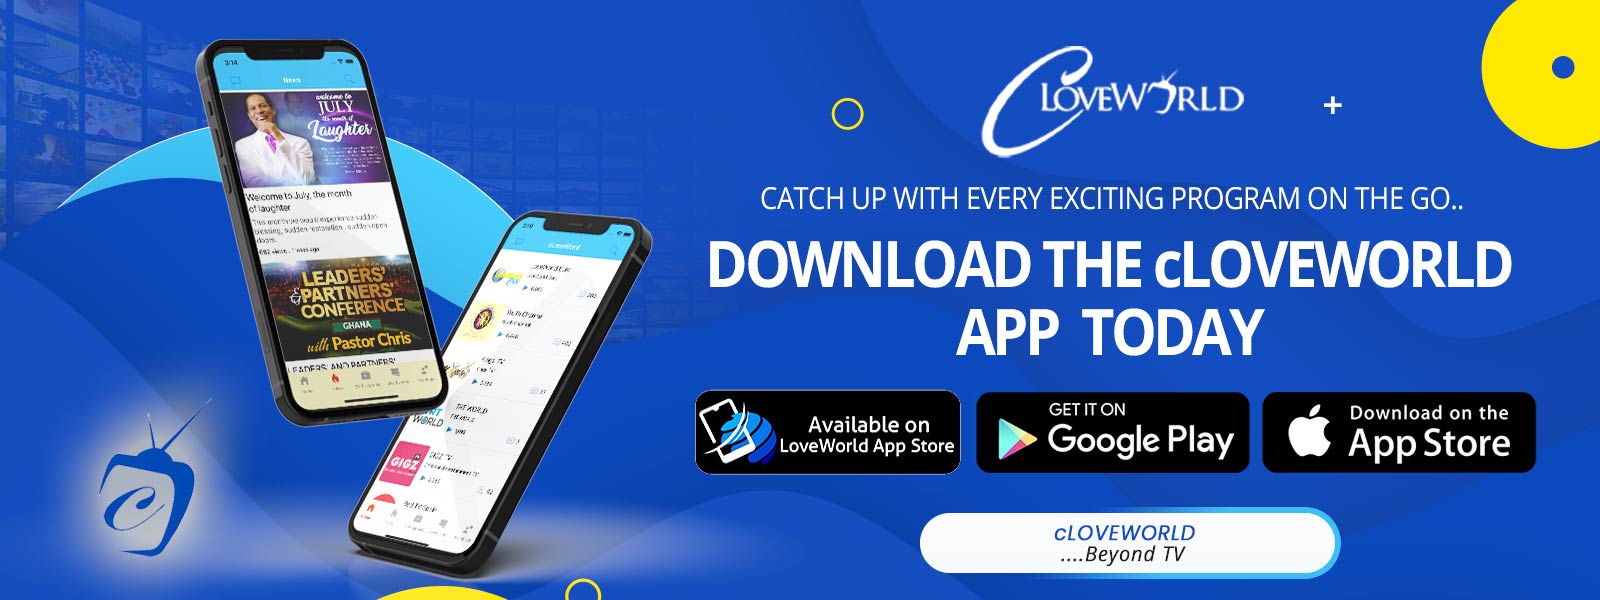 DOWNLOAD THE cLOVEWORLD APP TODAY